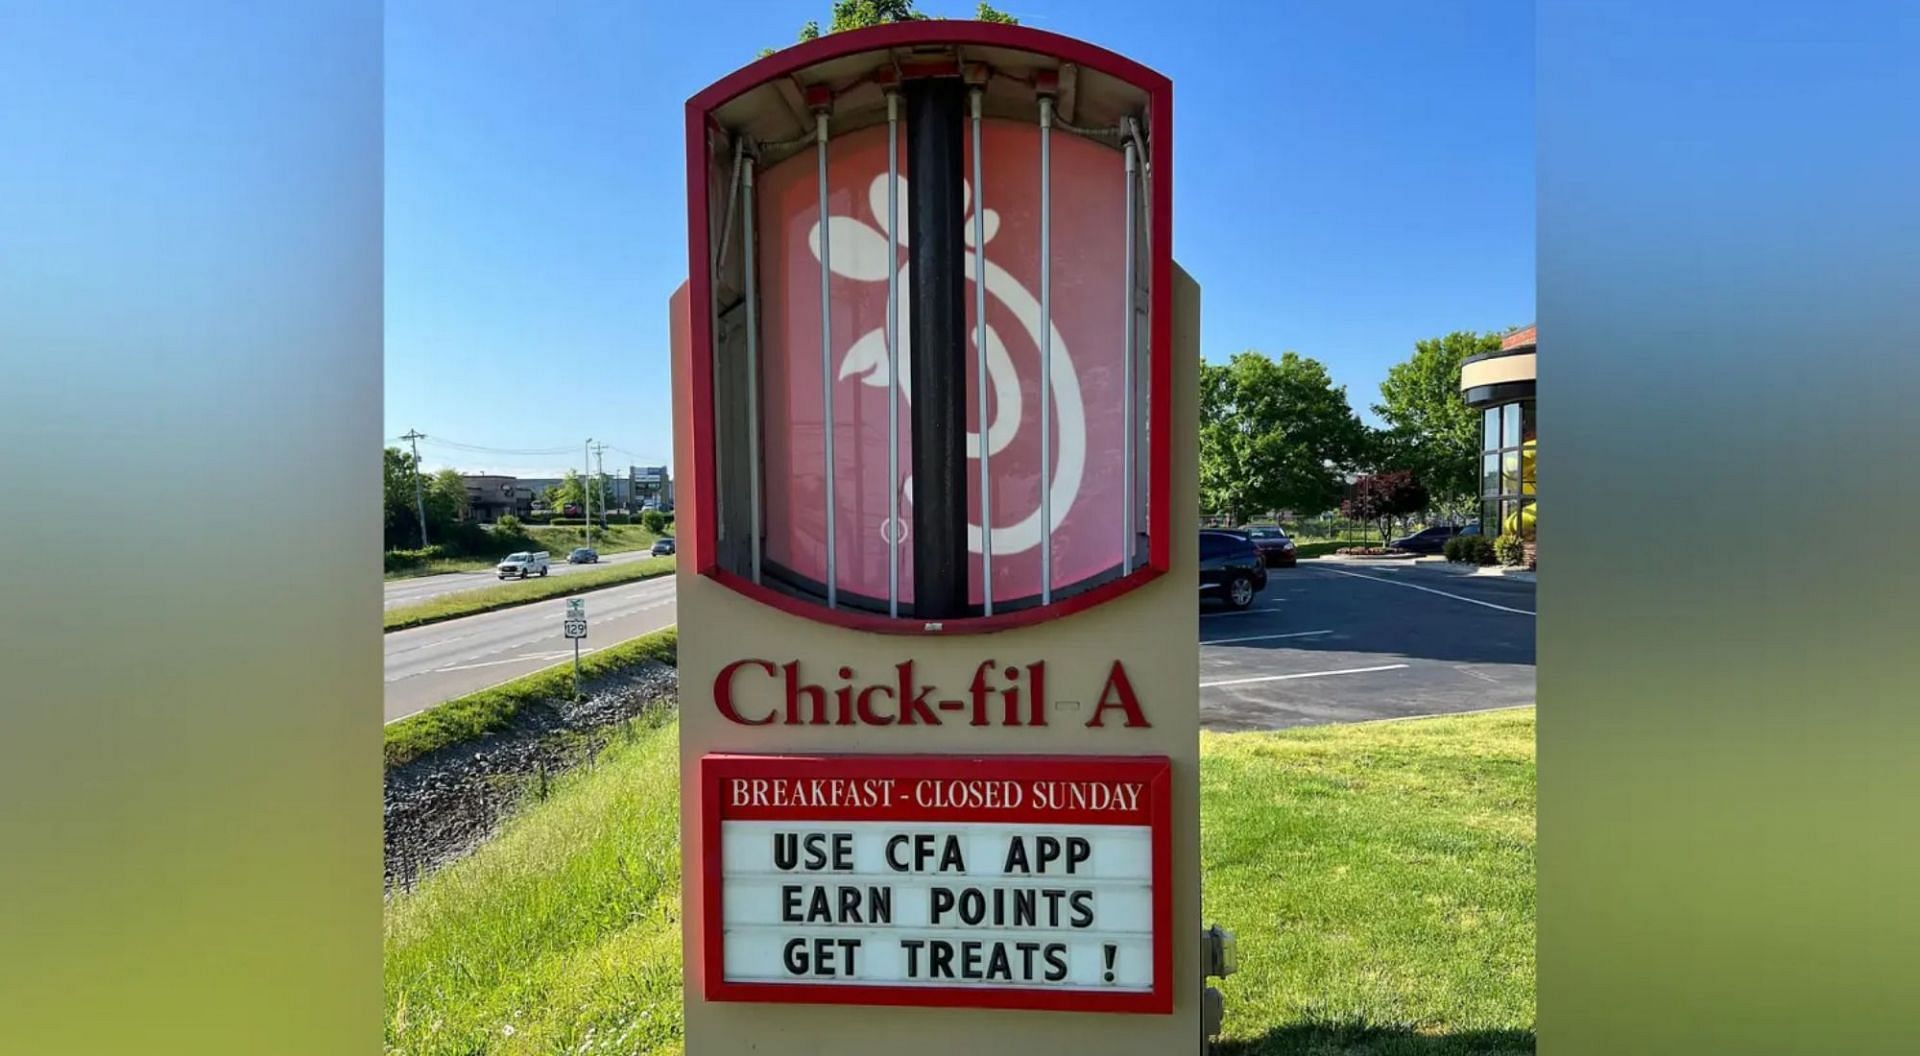 A Tennessee Chick-fil-A restaurant offers free food for a year in exchange for returning their missing sign (Image via Chick-fil-A)